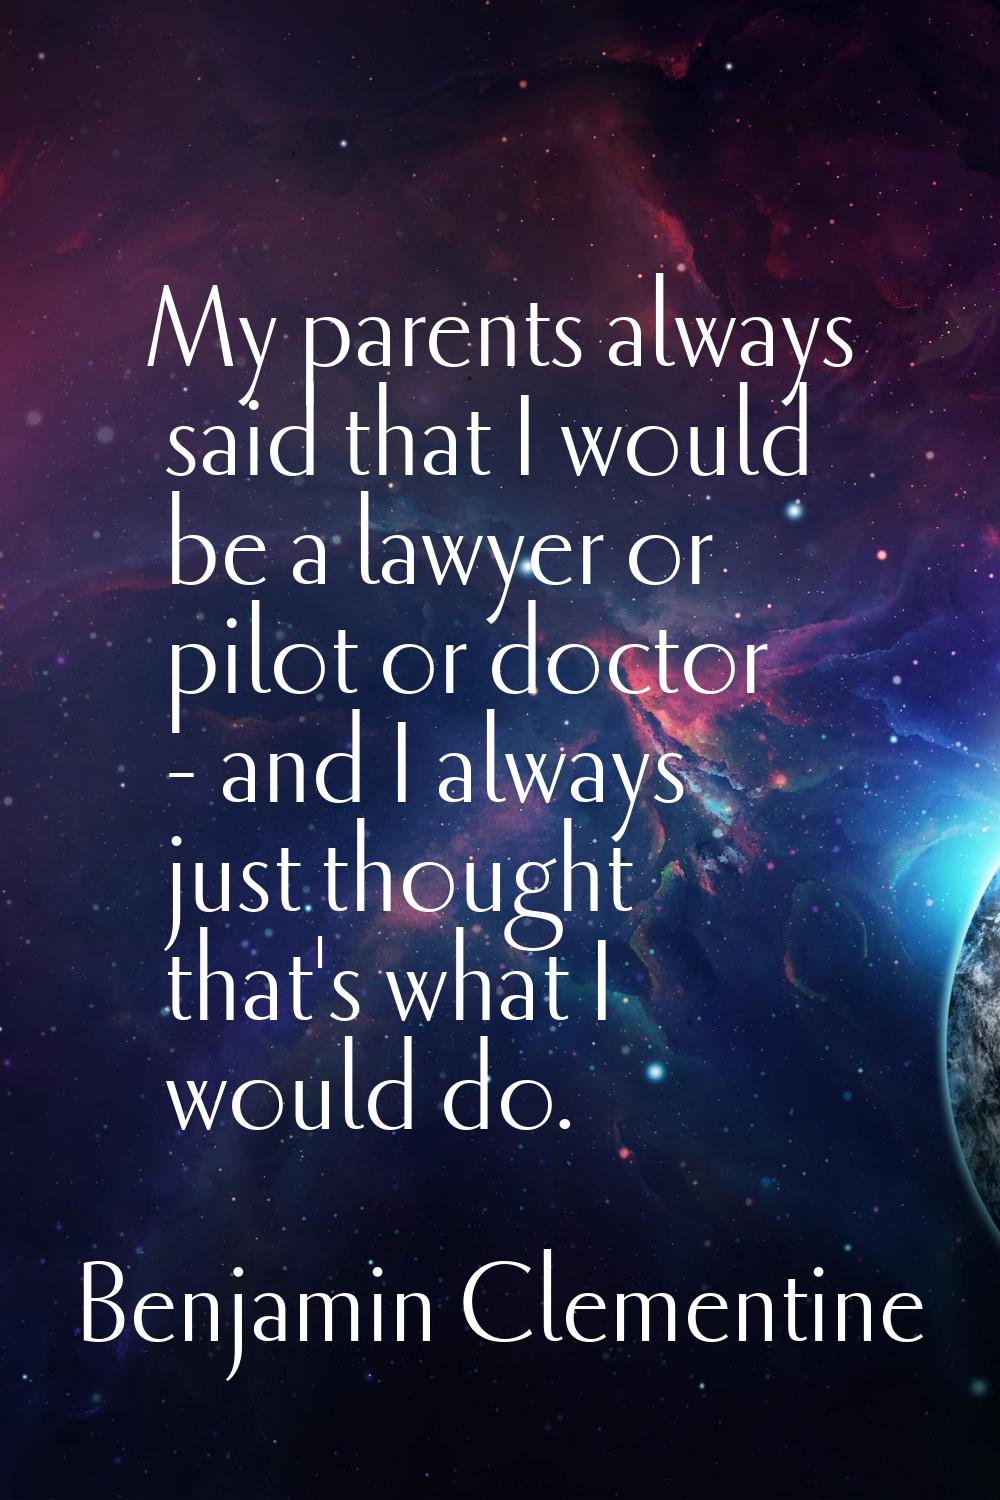 My parents always said that I would be a lawyer or pilot or doctor - and I always just thought that